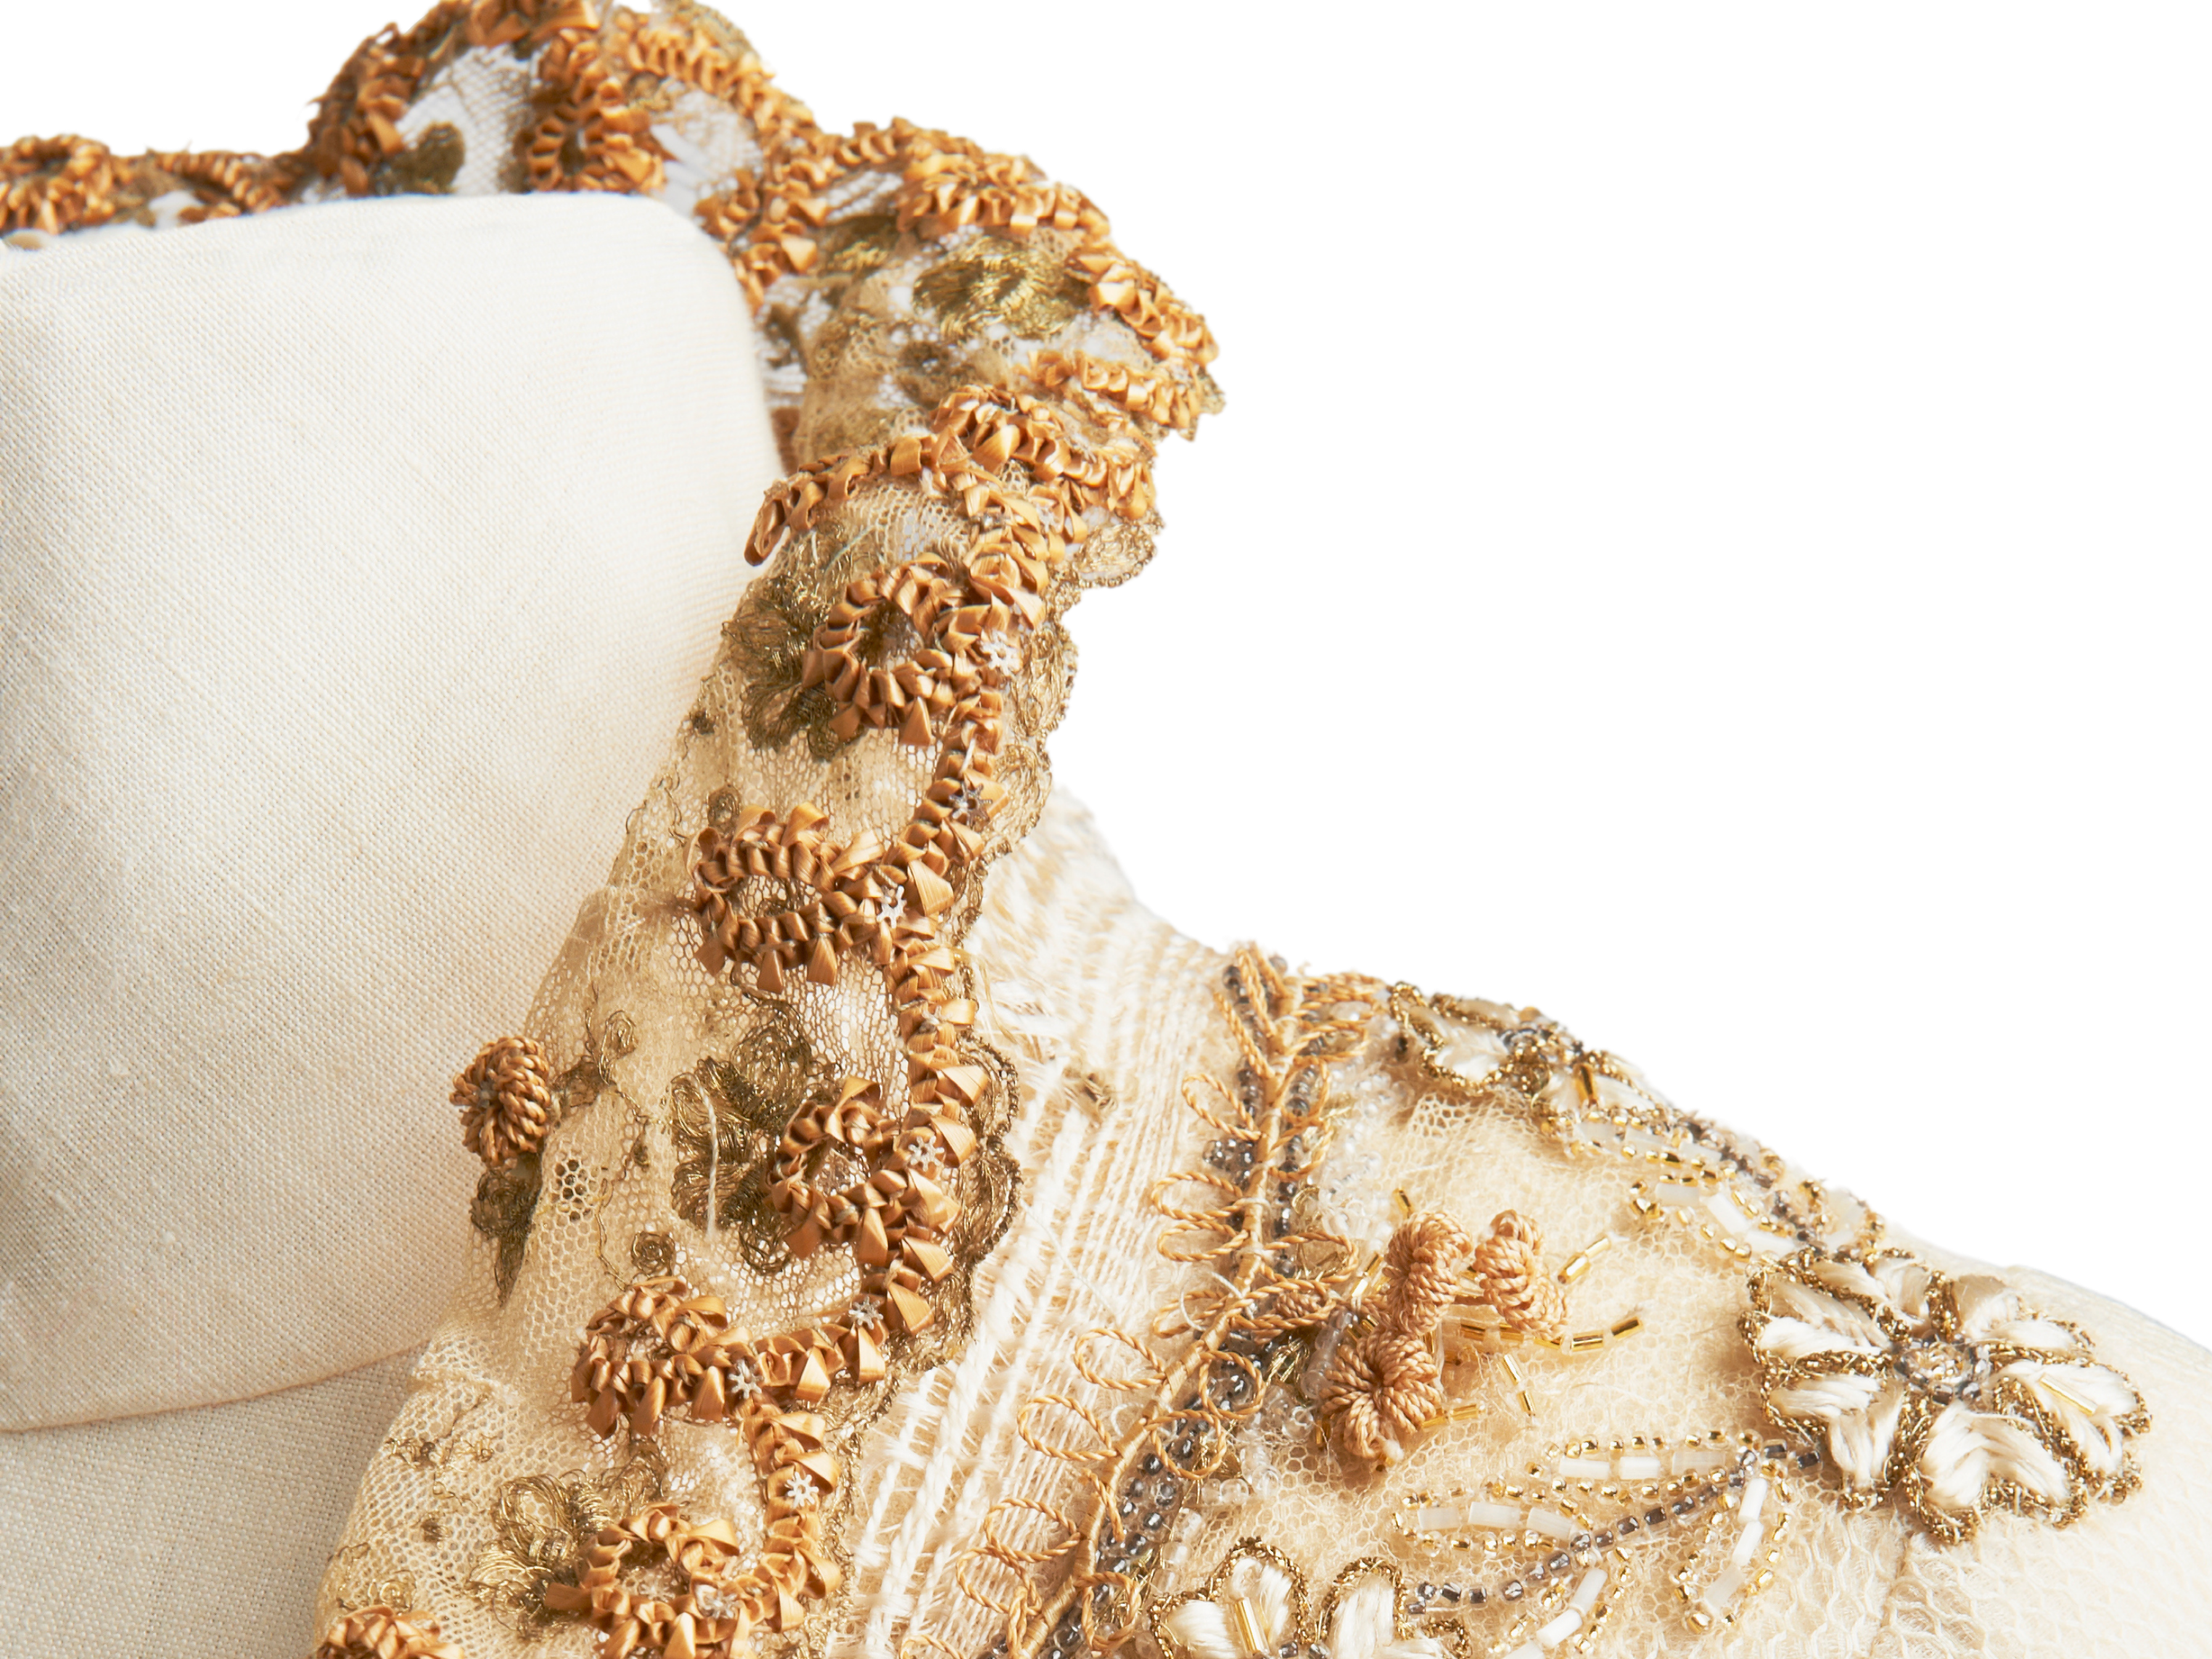 Wedding Dress, (detail), from Sense and Sensibility, 1995, Ang Lee, director. Worn by Kate Winslet as Marianne Dashwood. Jenny Beavan and John Bright, costume designers